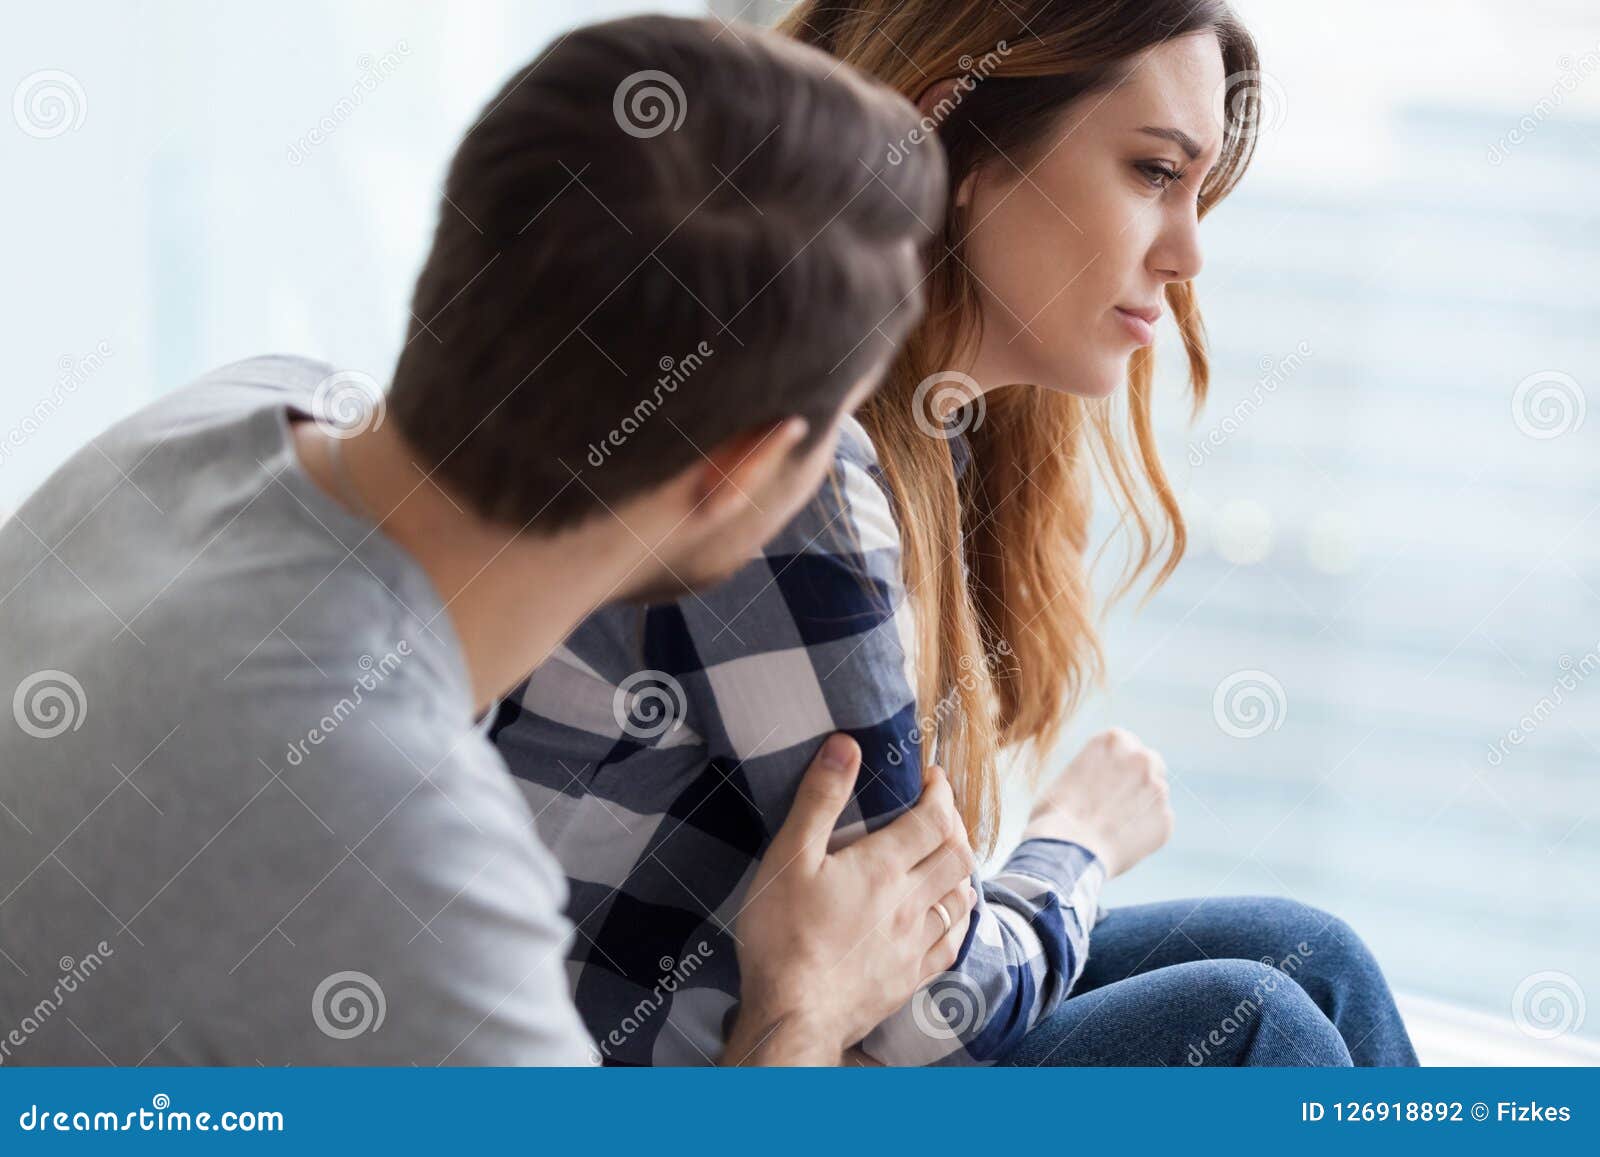 caring man comforting upset wife after fight